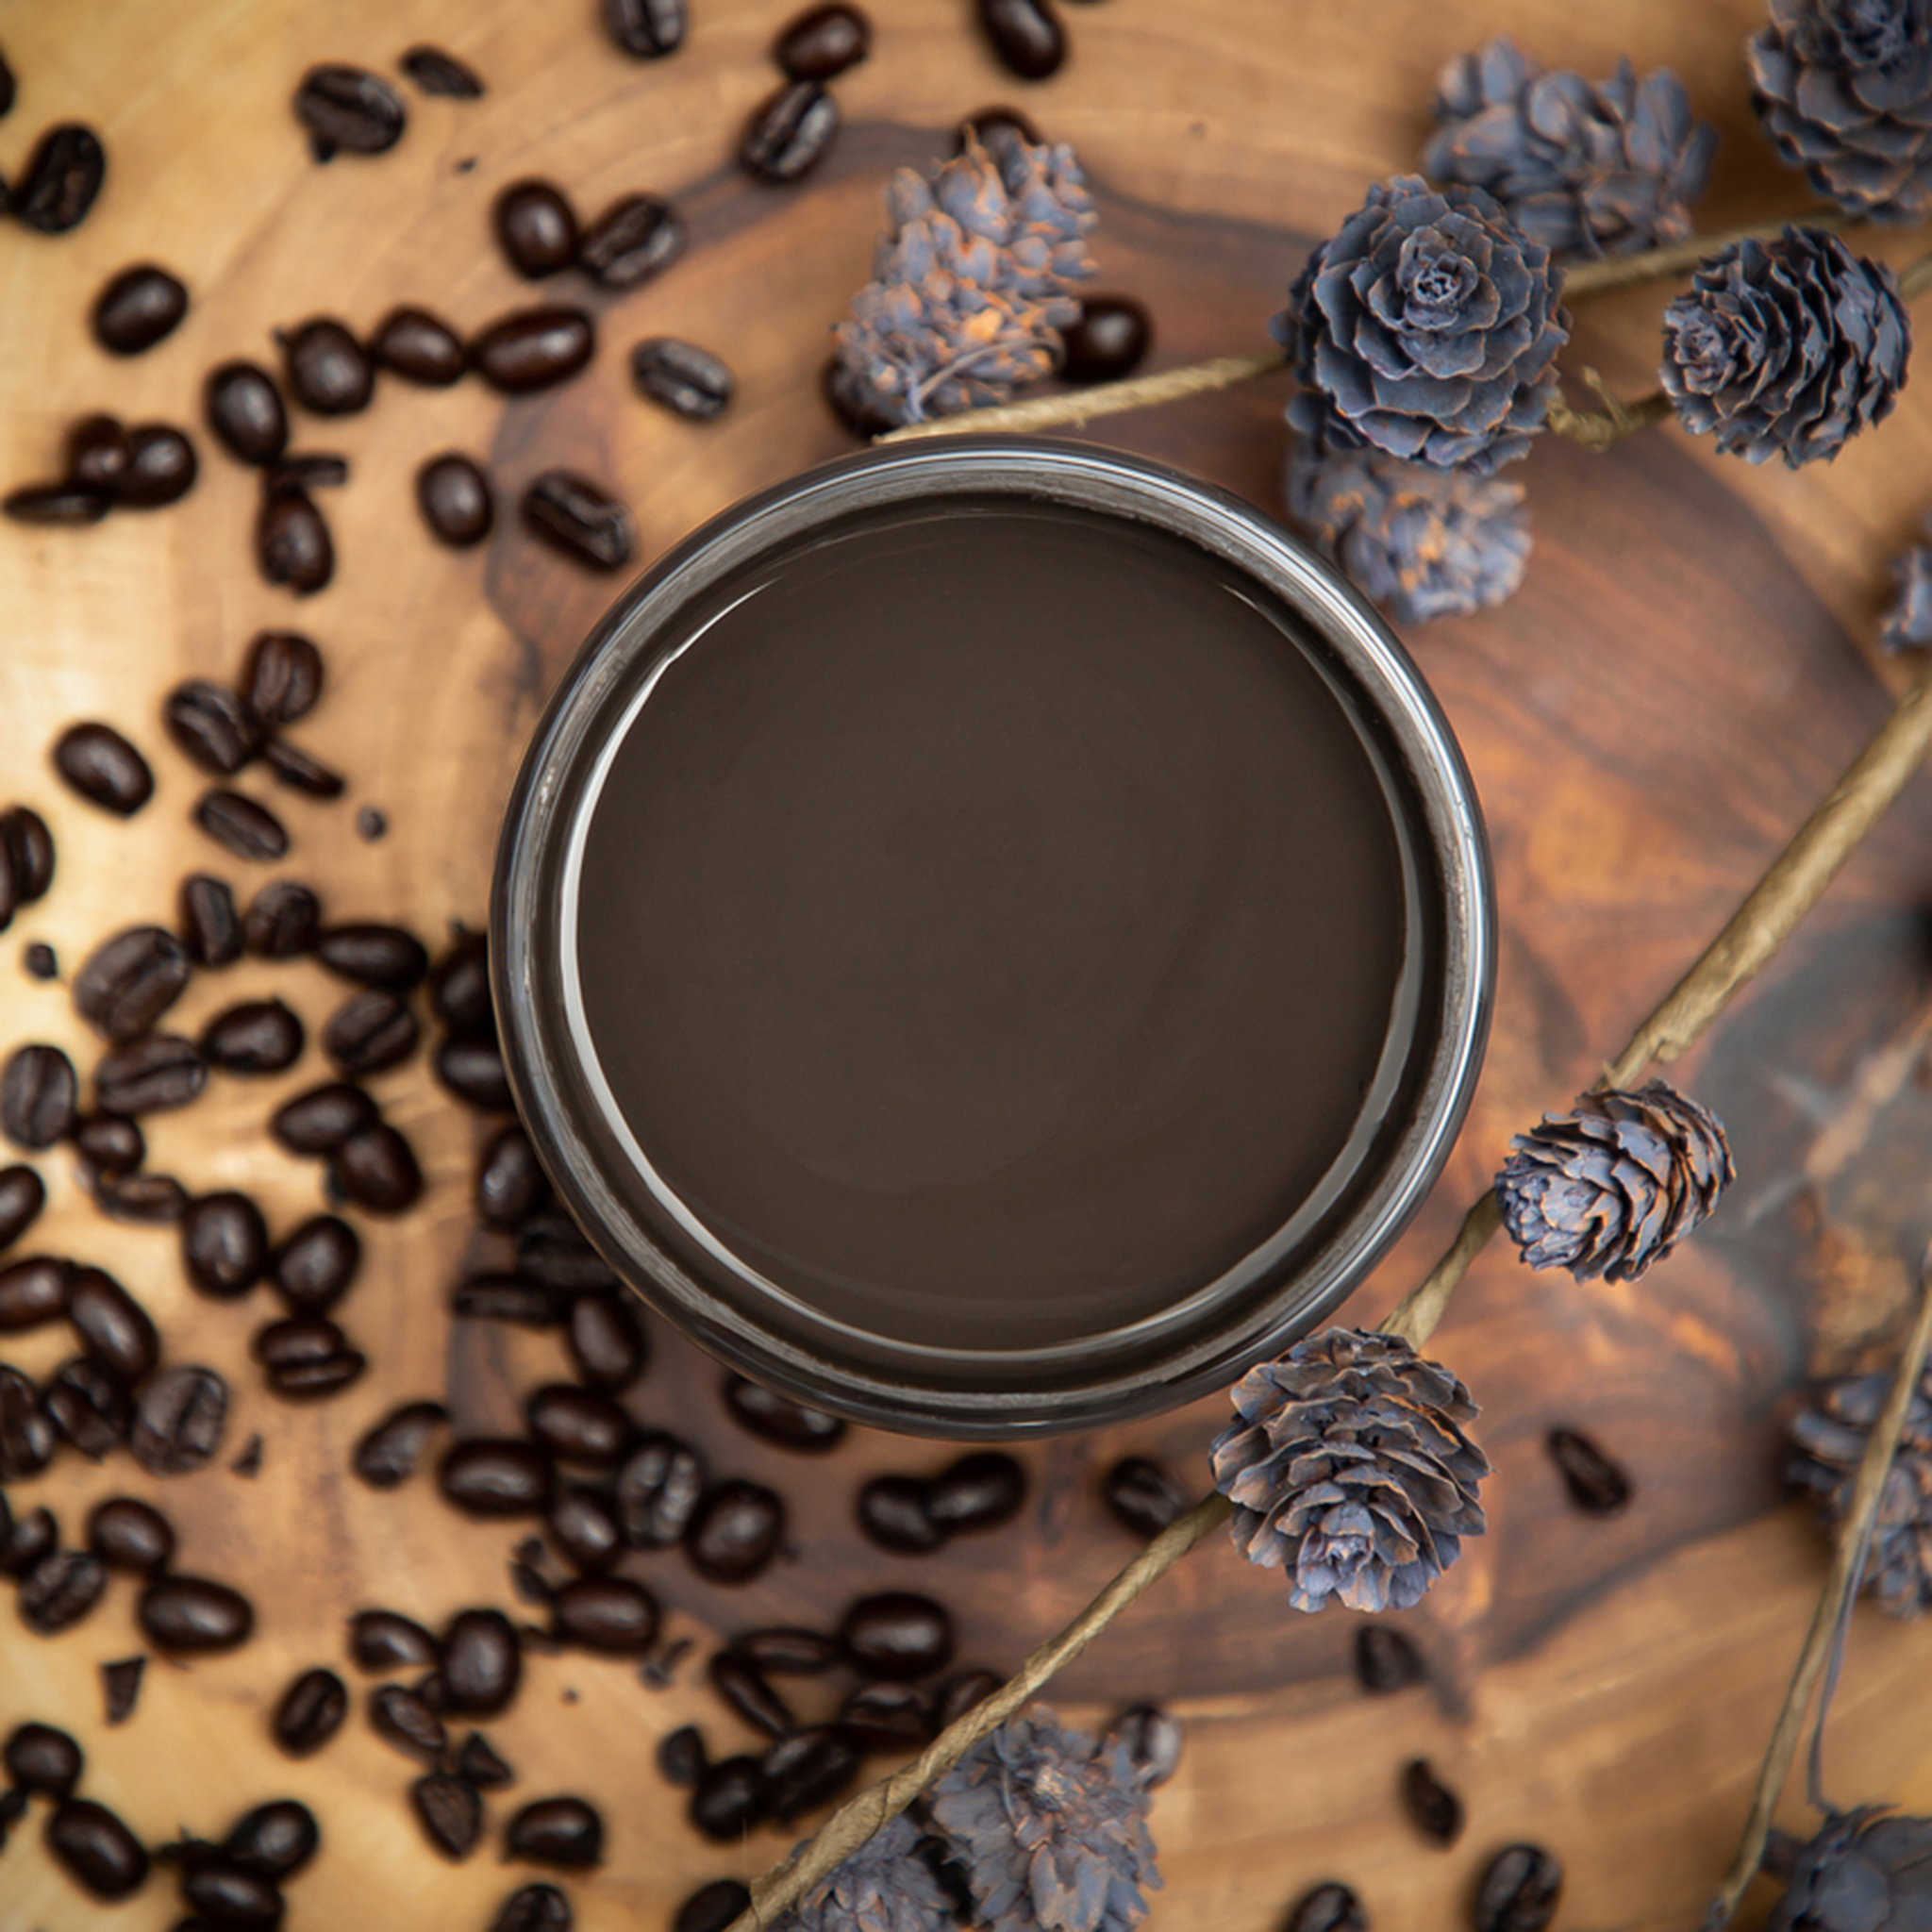 An arial view of an open container of Dixie Belle Paint Company's Coffee Bean Chalk Mineral Paint is surrounded by coffee beans and small pine cones on branches against a wood table.